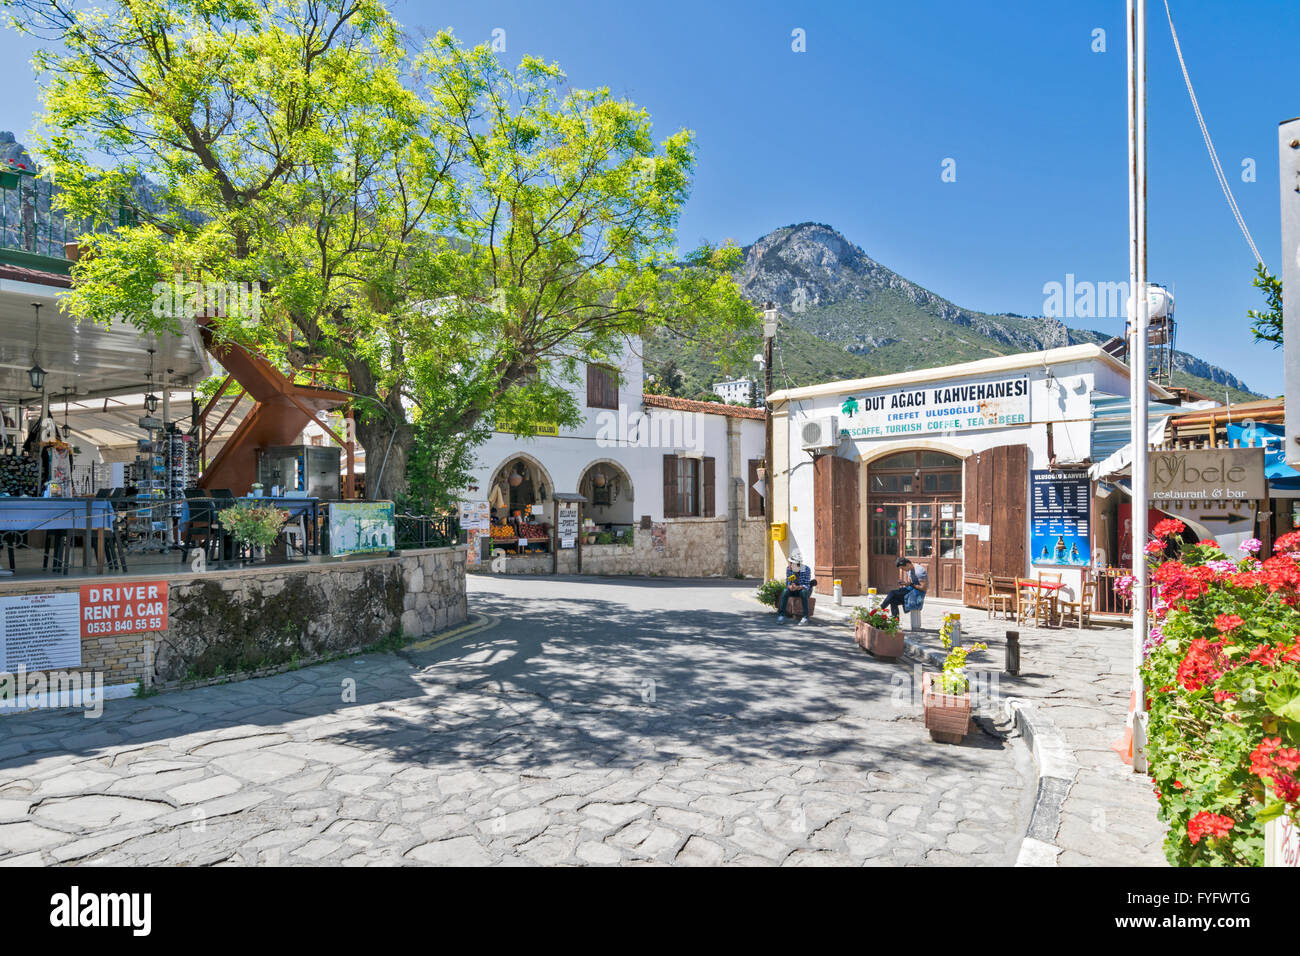 NORTH CYPRUS BELLAPAIS MAIN SQUARE WITH LAWRENCE DURRELLS TREE OF IDLENESS ALONGSIDE A RESTAURANT Stock Photo